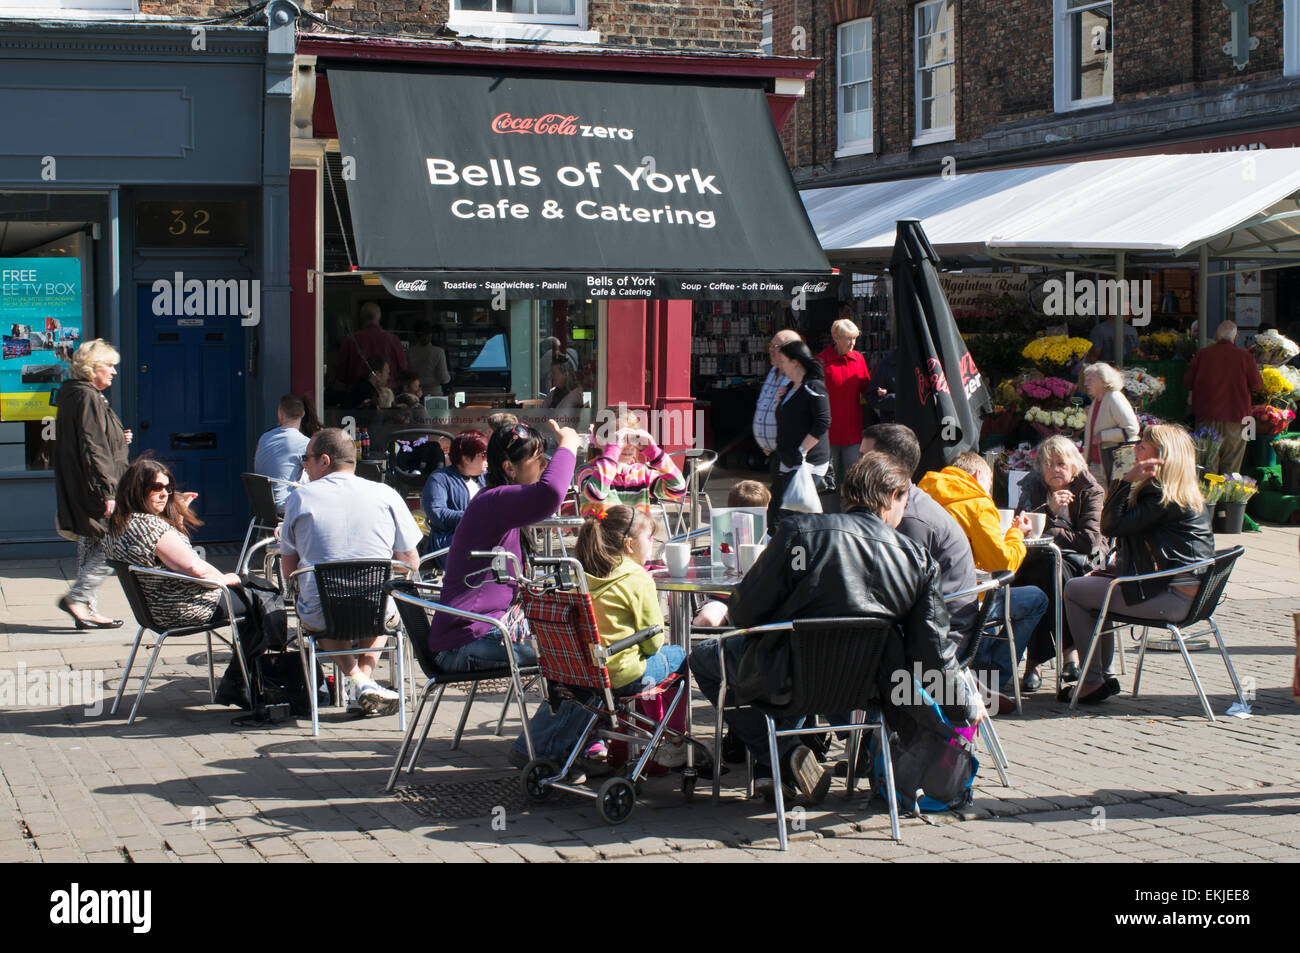 People sitting eating outside Bell's of York café, City of York, England, UK Stock Photo